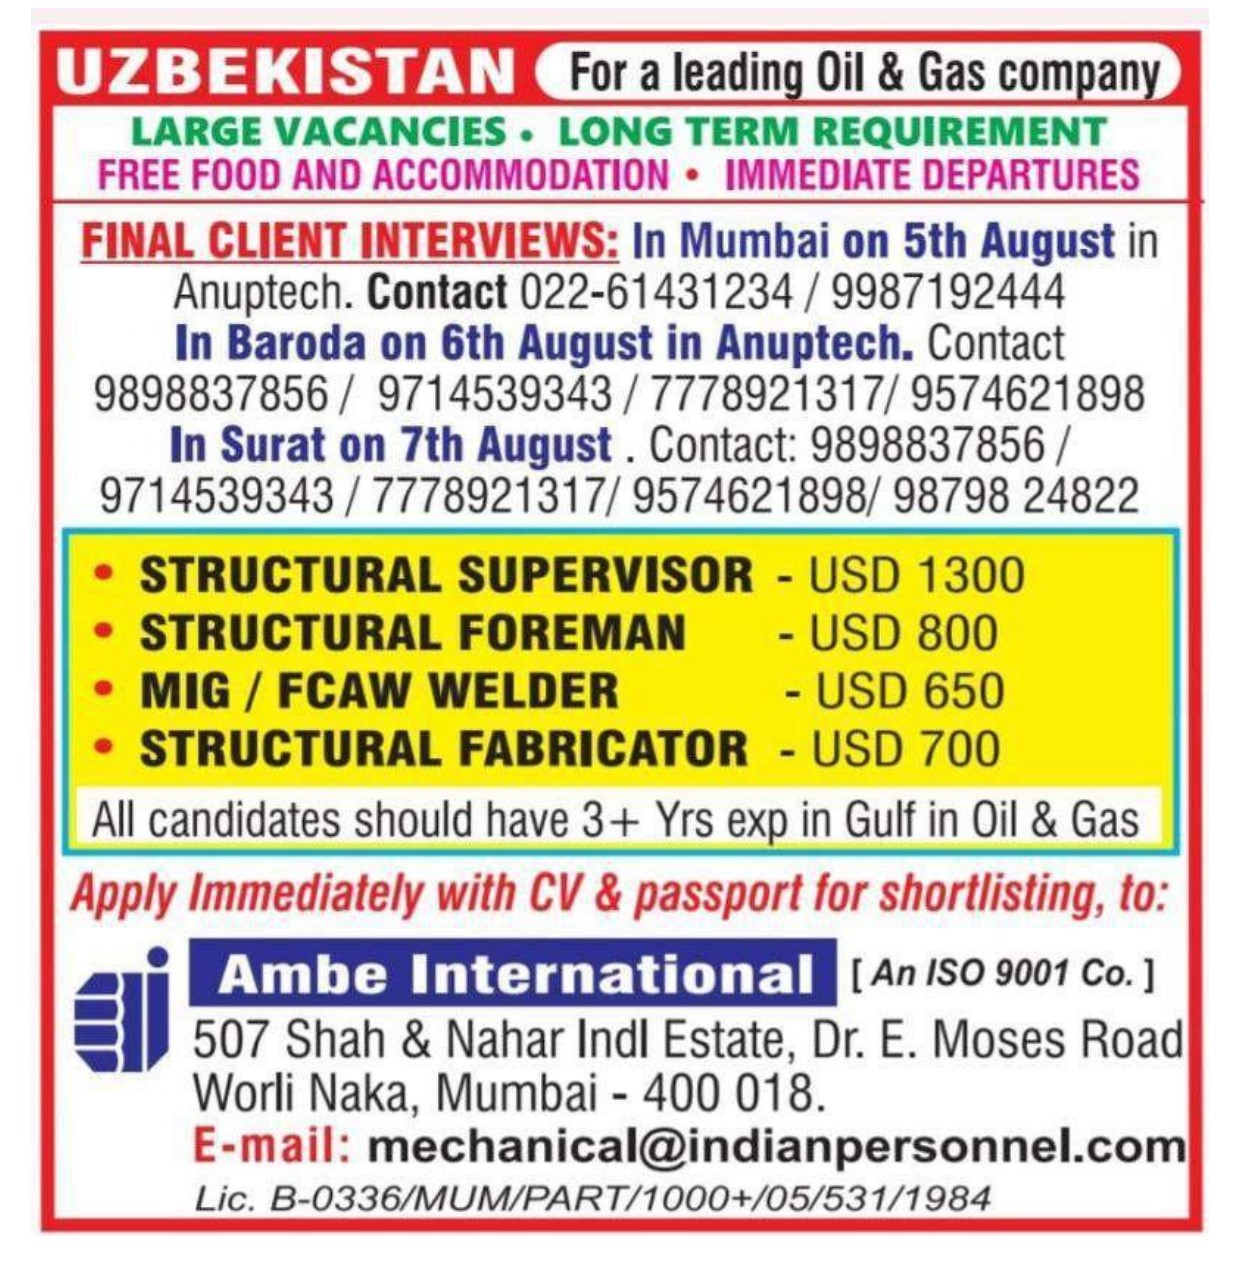 Interview in Mumbai for Oil & Gas